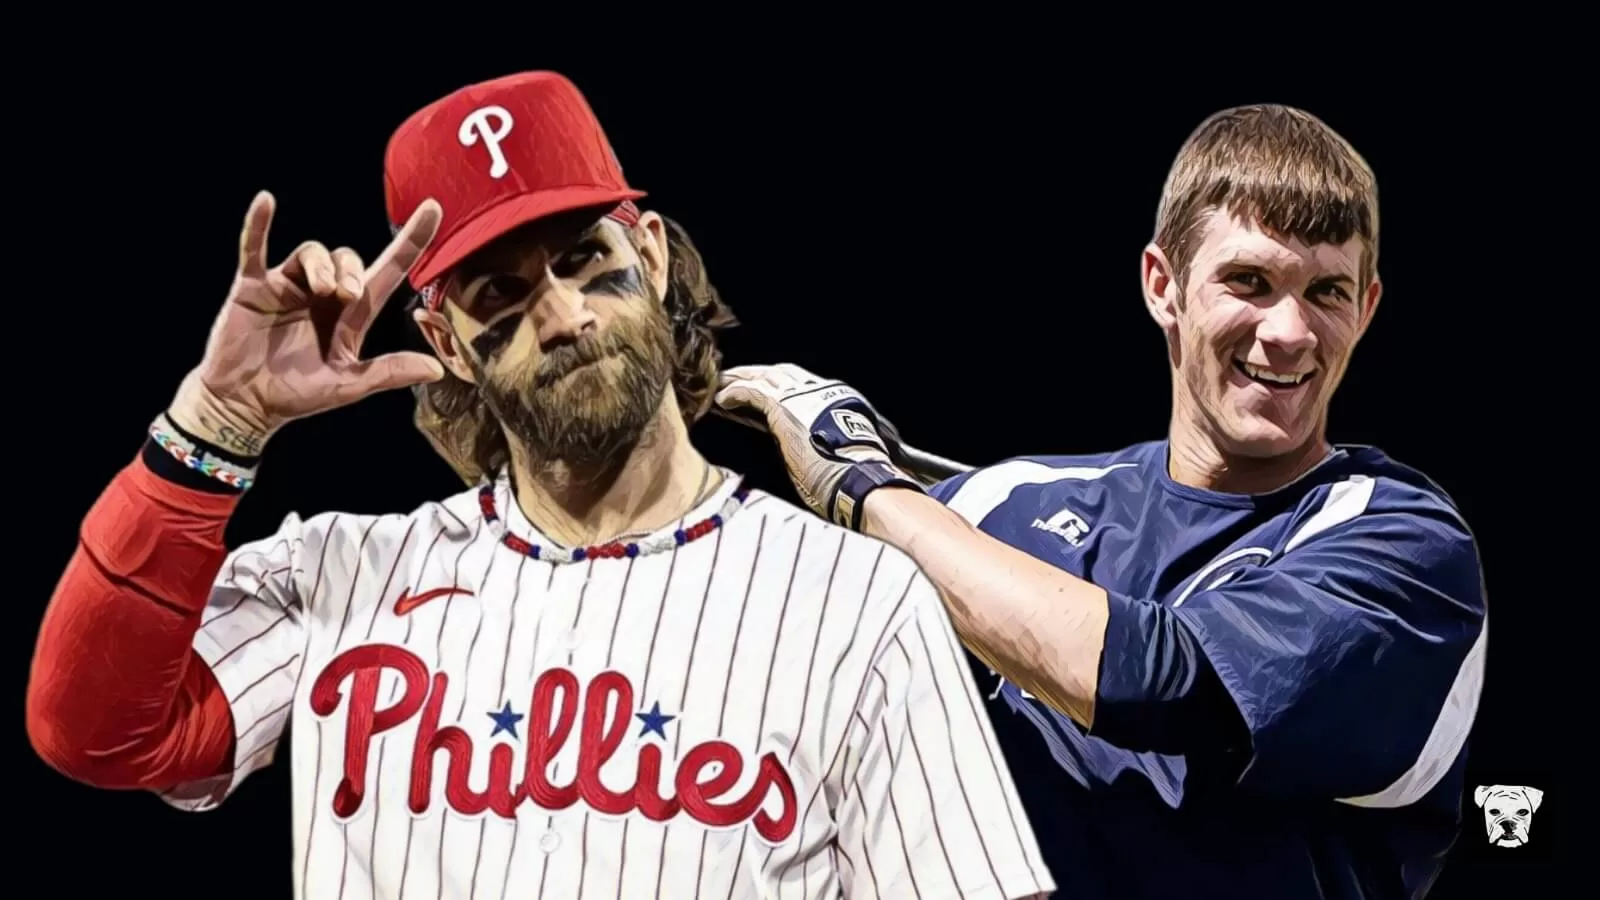 An illustration of Bryce Harper in a Philadelphia Phillies jersey next to an illustration of a young Bryce Harper during his junior college days